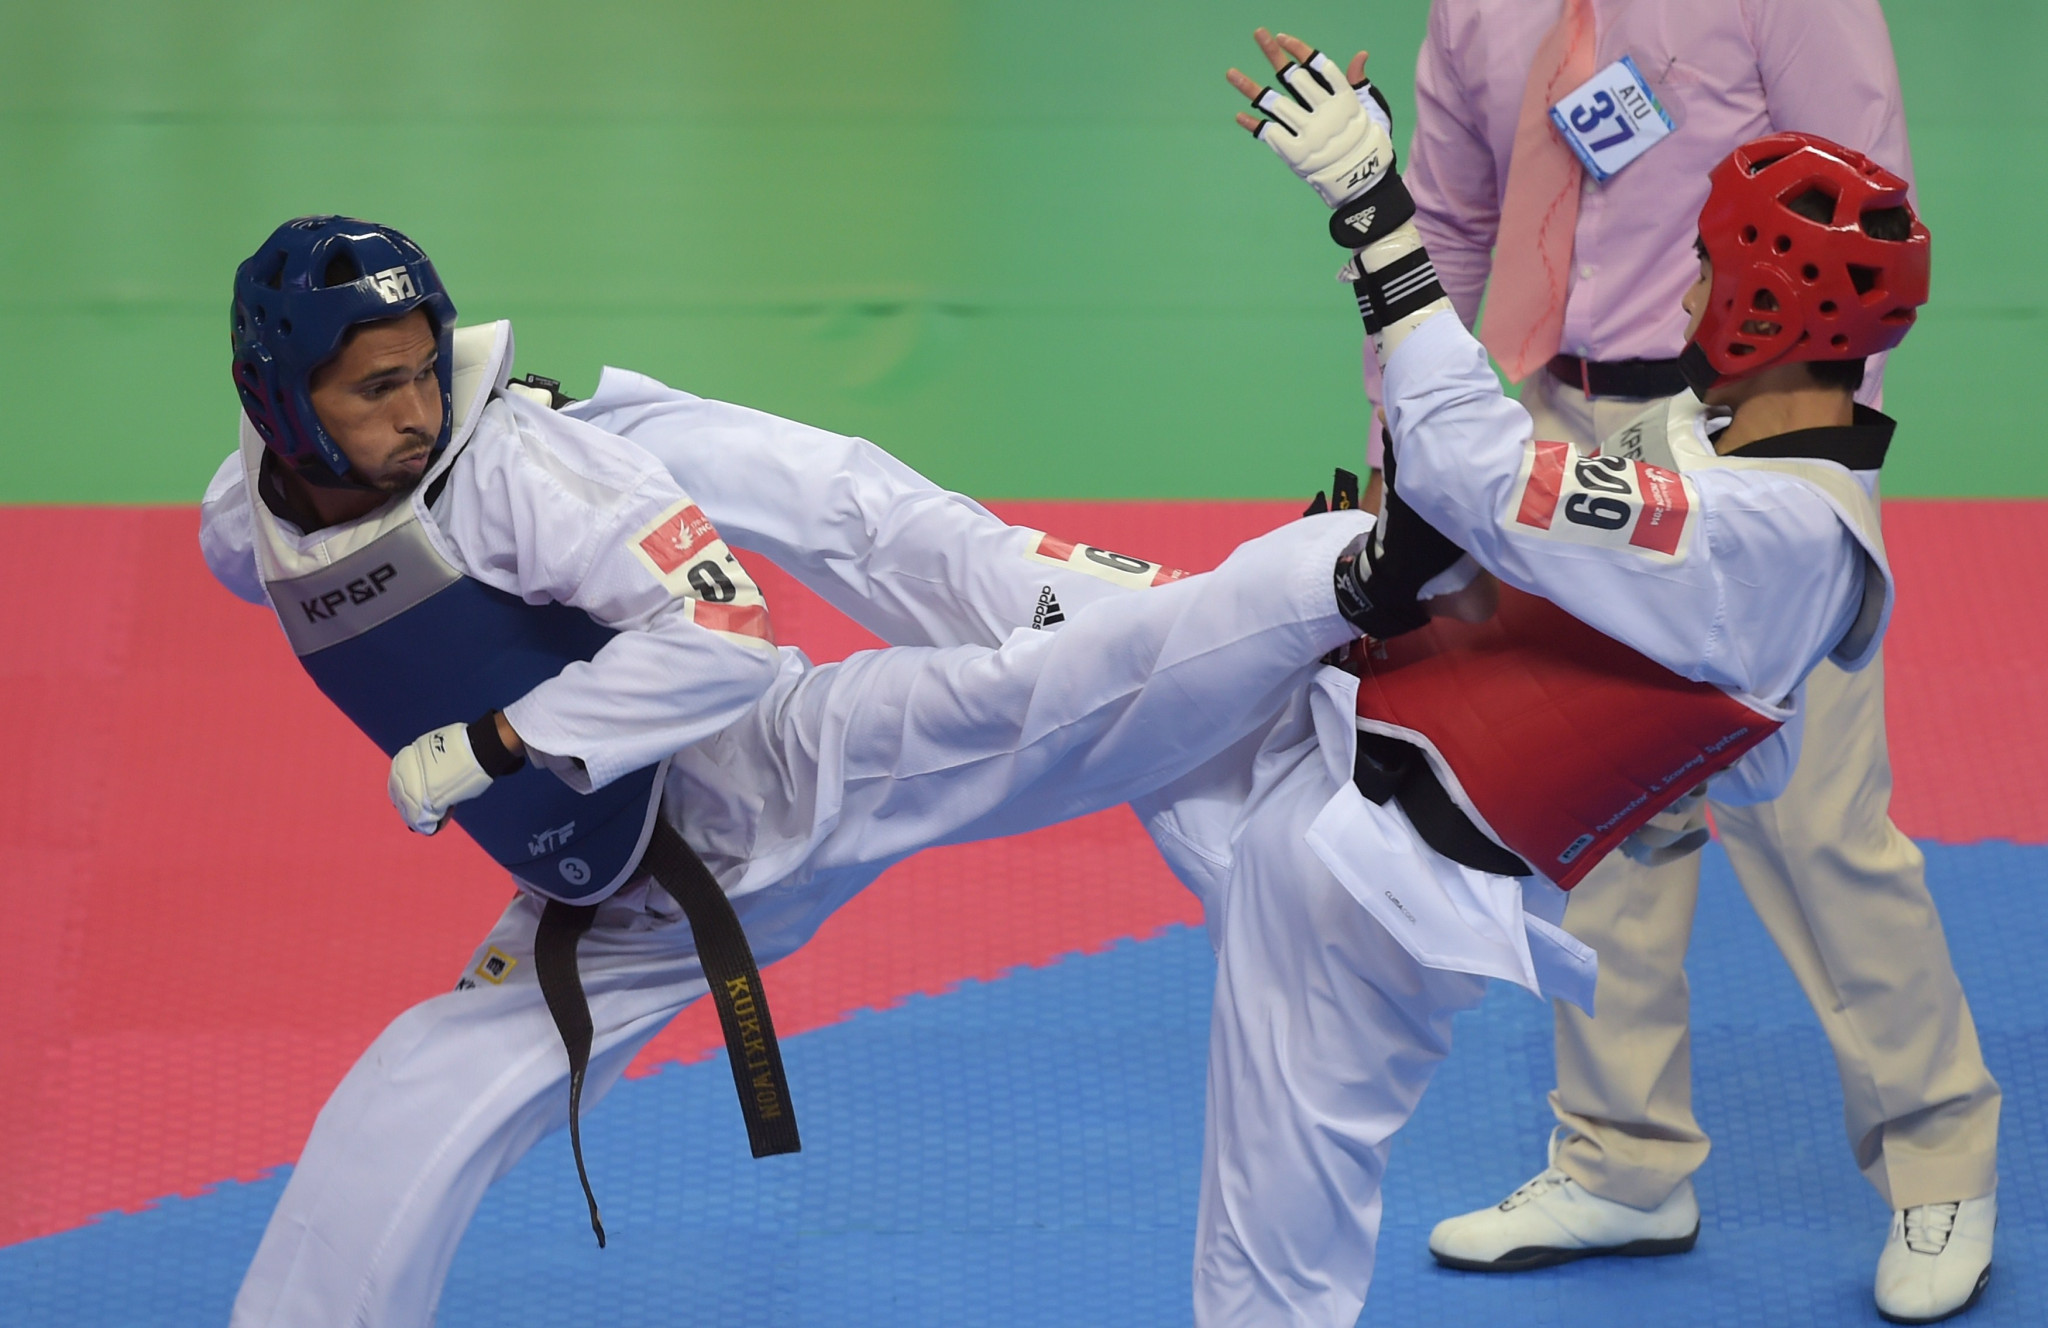 Pakistan is an emerging taekwondo nation and athletes from the country have not qualified for the Olympic Games so far ©Getty Images